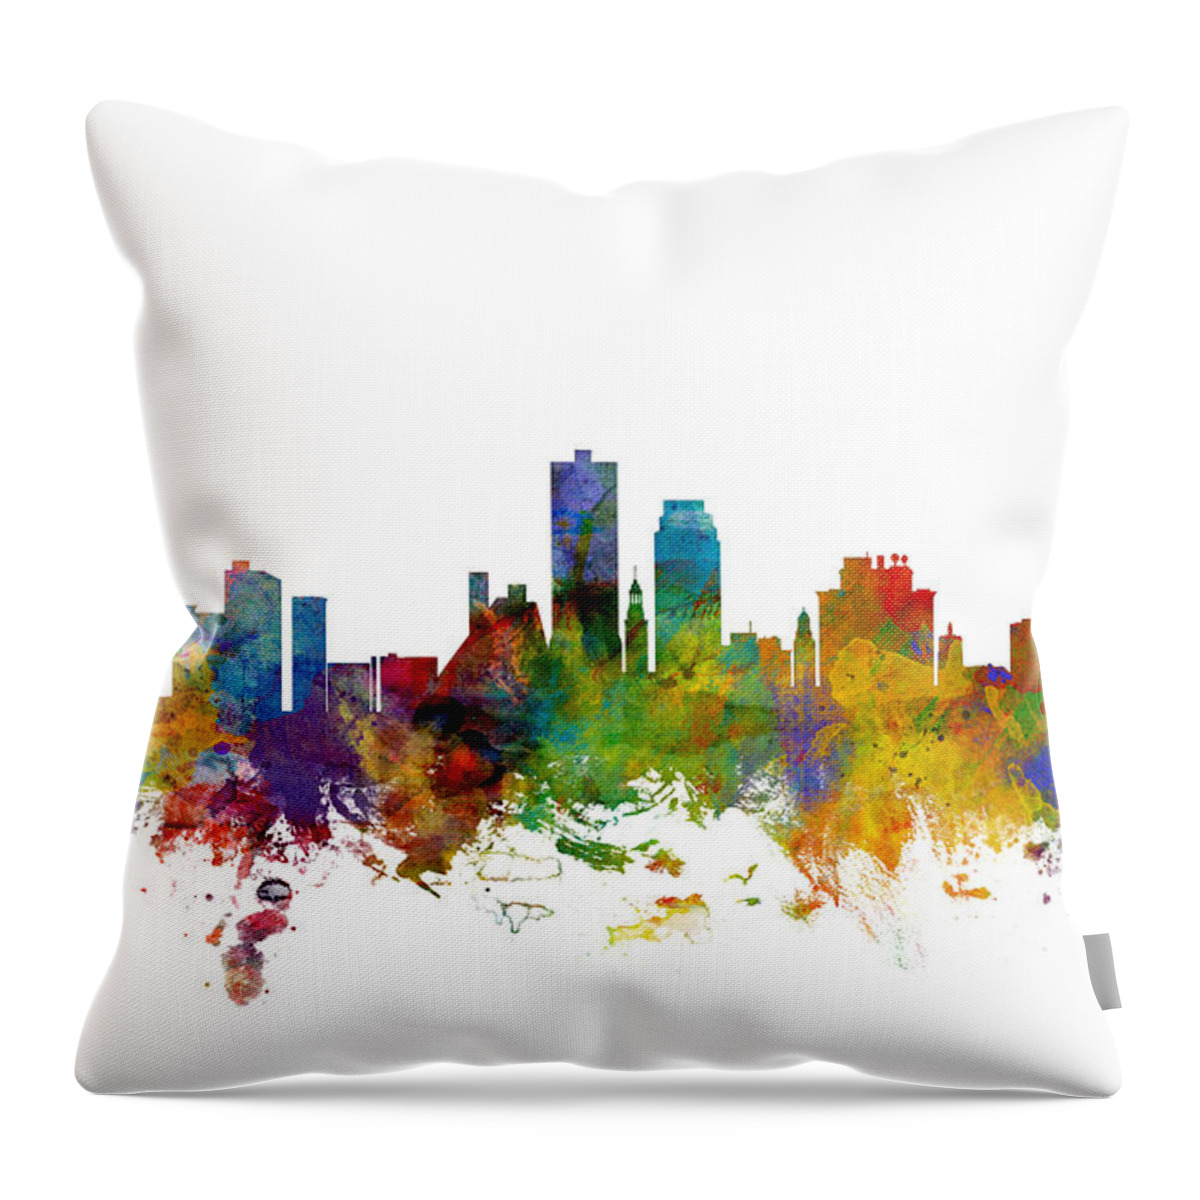 United States Throw Pillow featuring the digital art Knoxville Tennessee Skyline #1 by Michael Tompsett